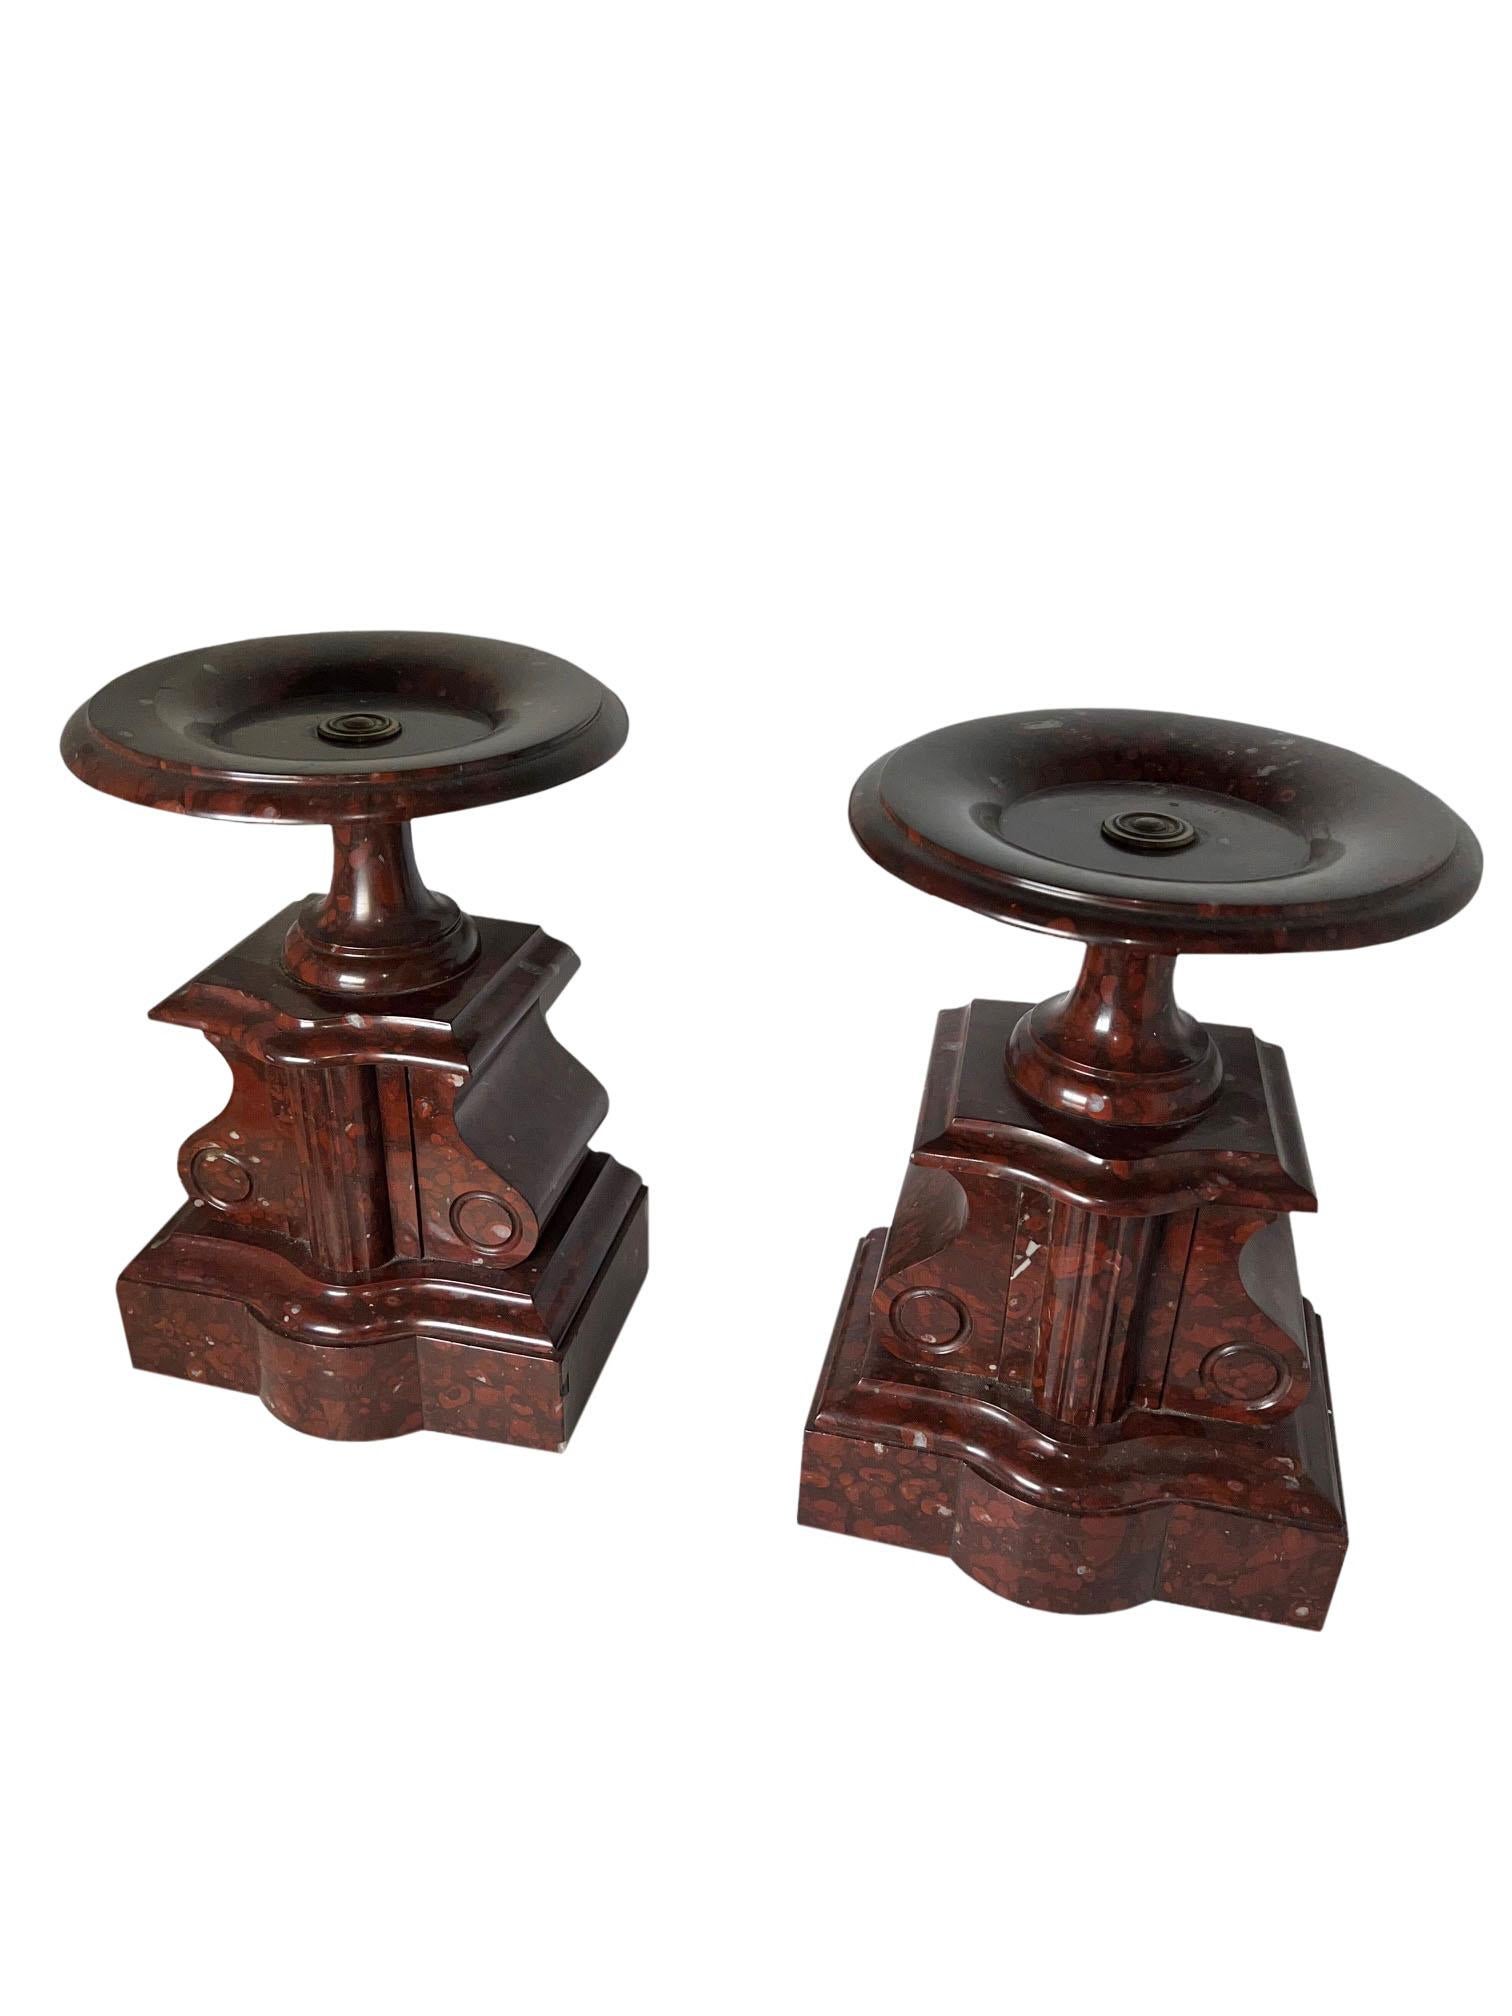 A fabulous pair of red, rouge marble tazza's with carved design on bases. France, circa 1860. 